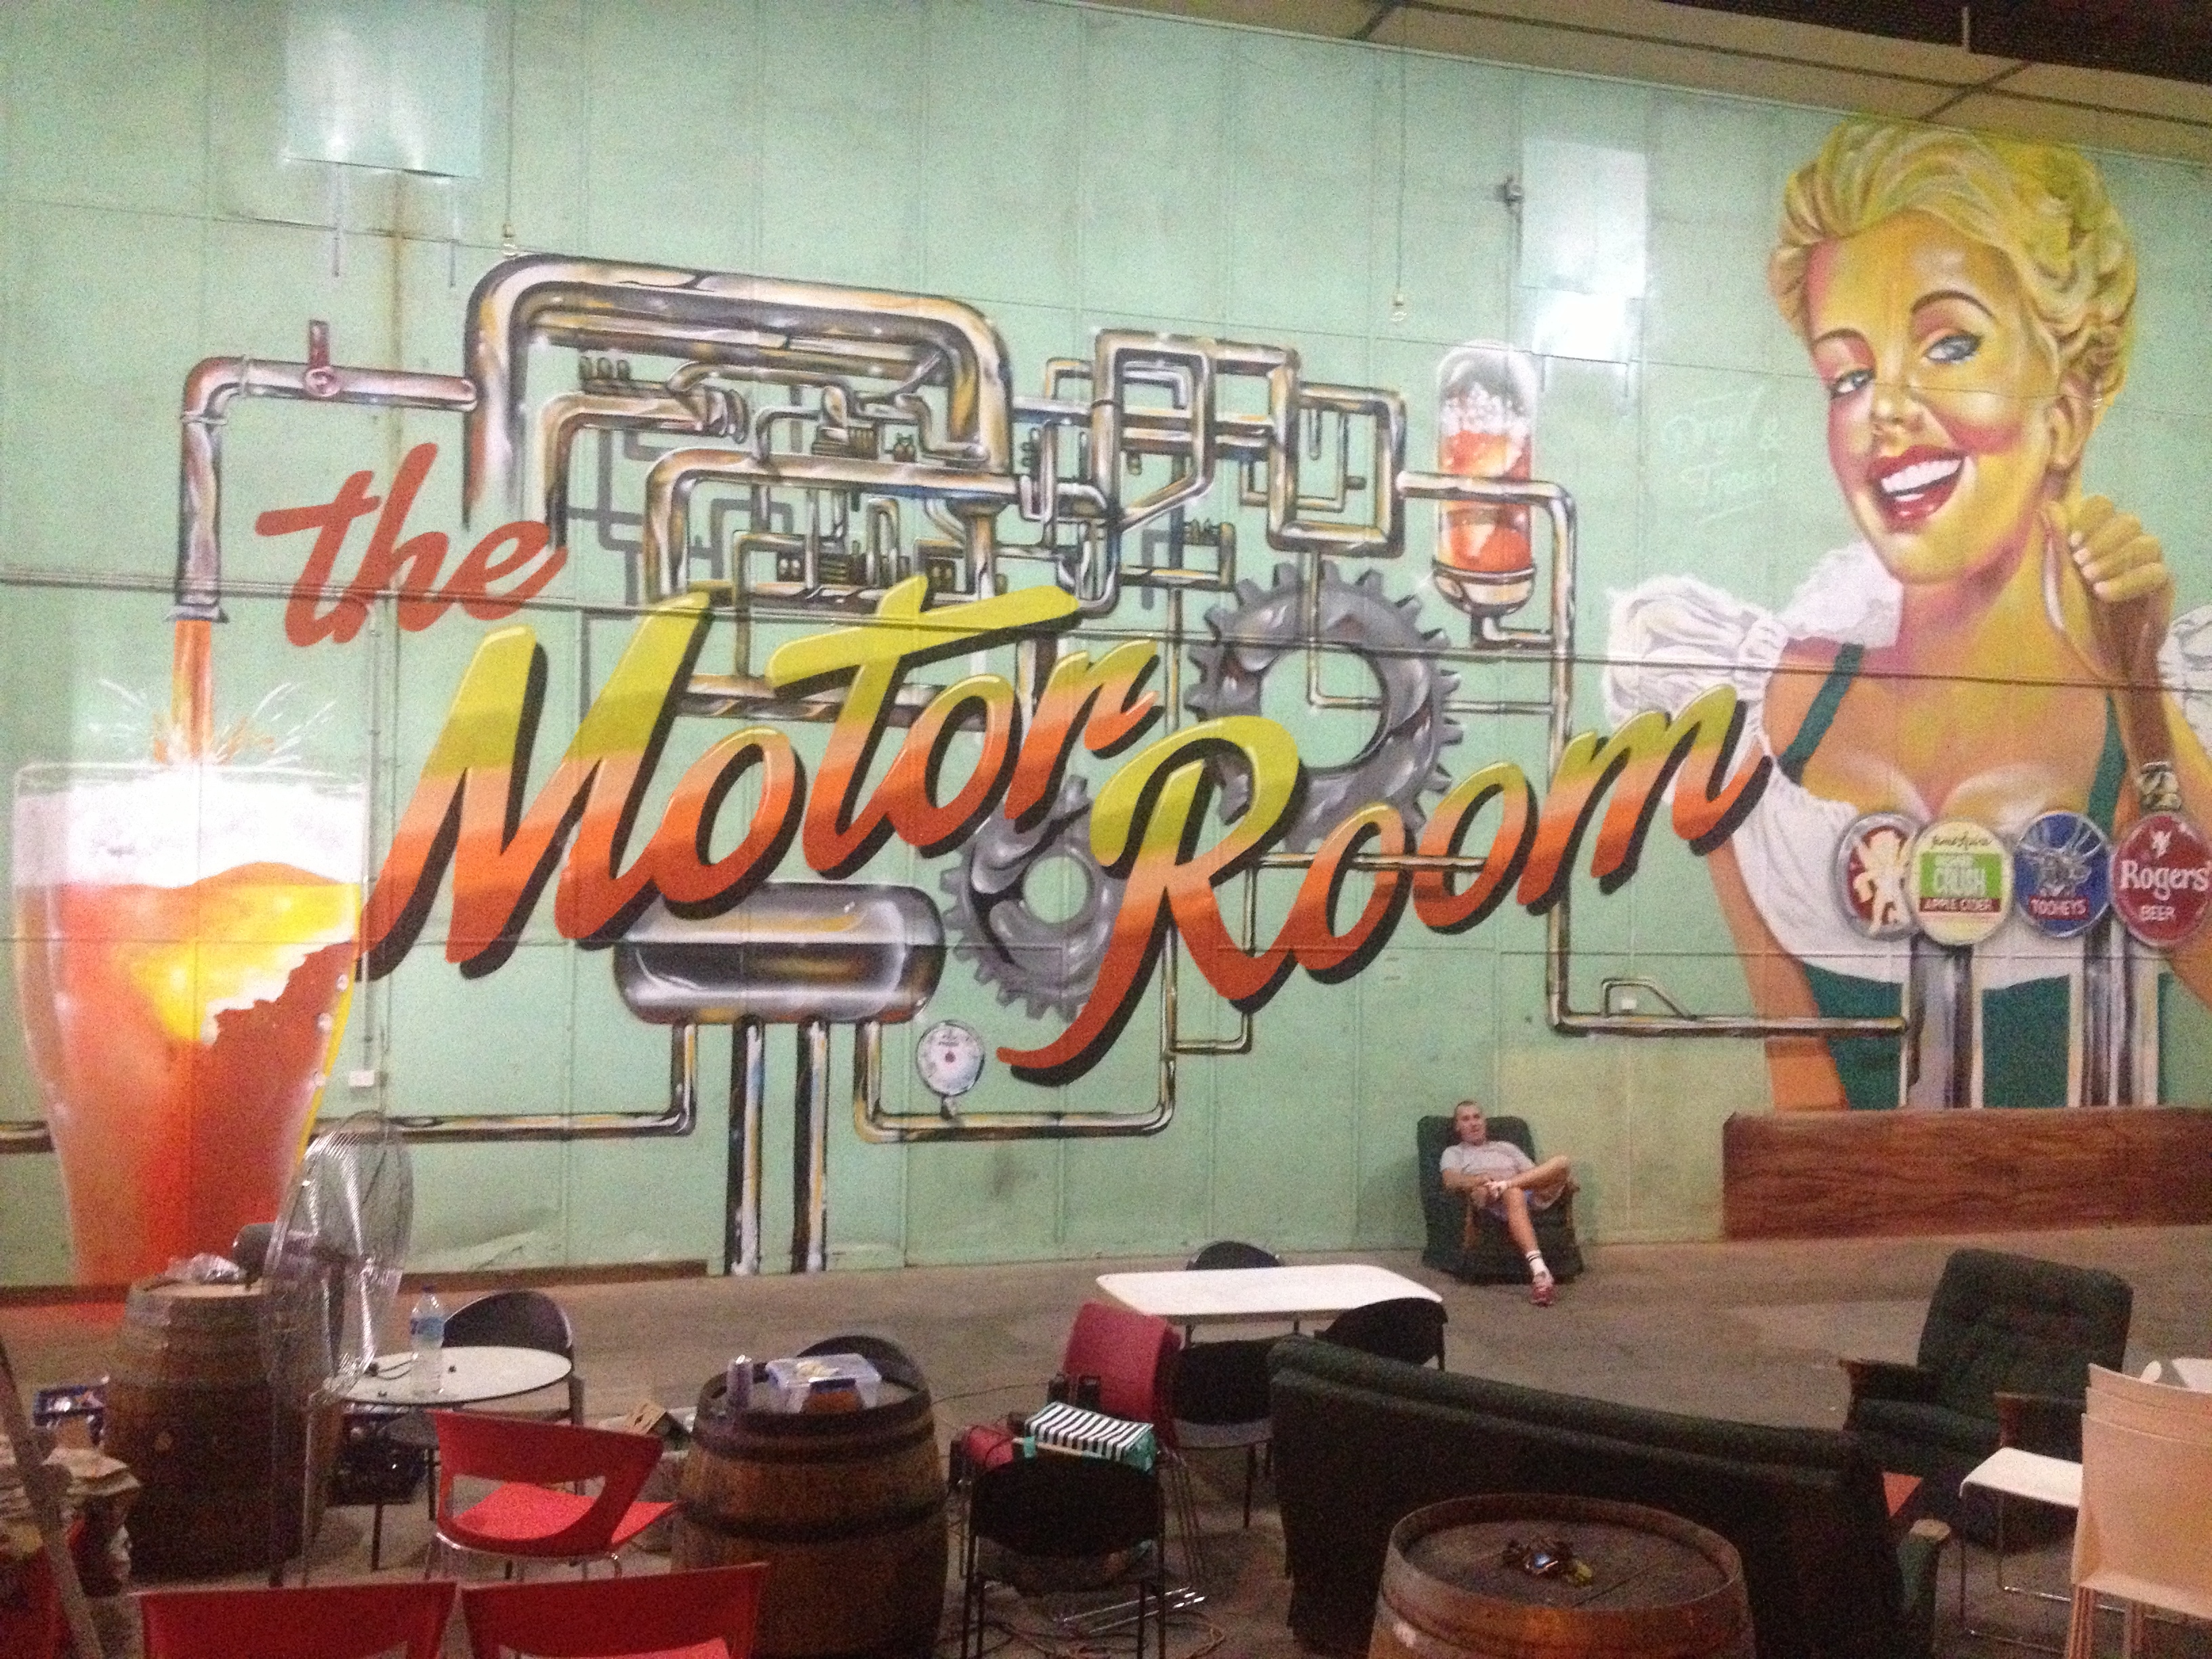 Graffiti Artists For Hire The Motor Room